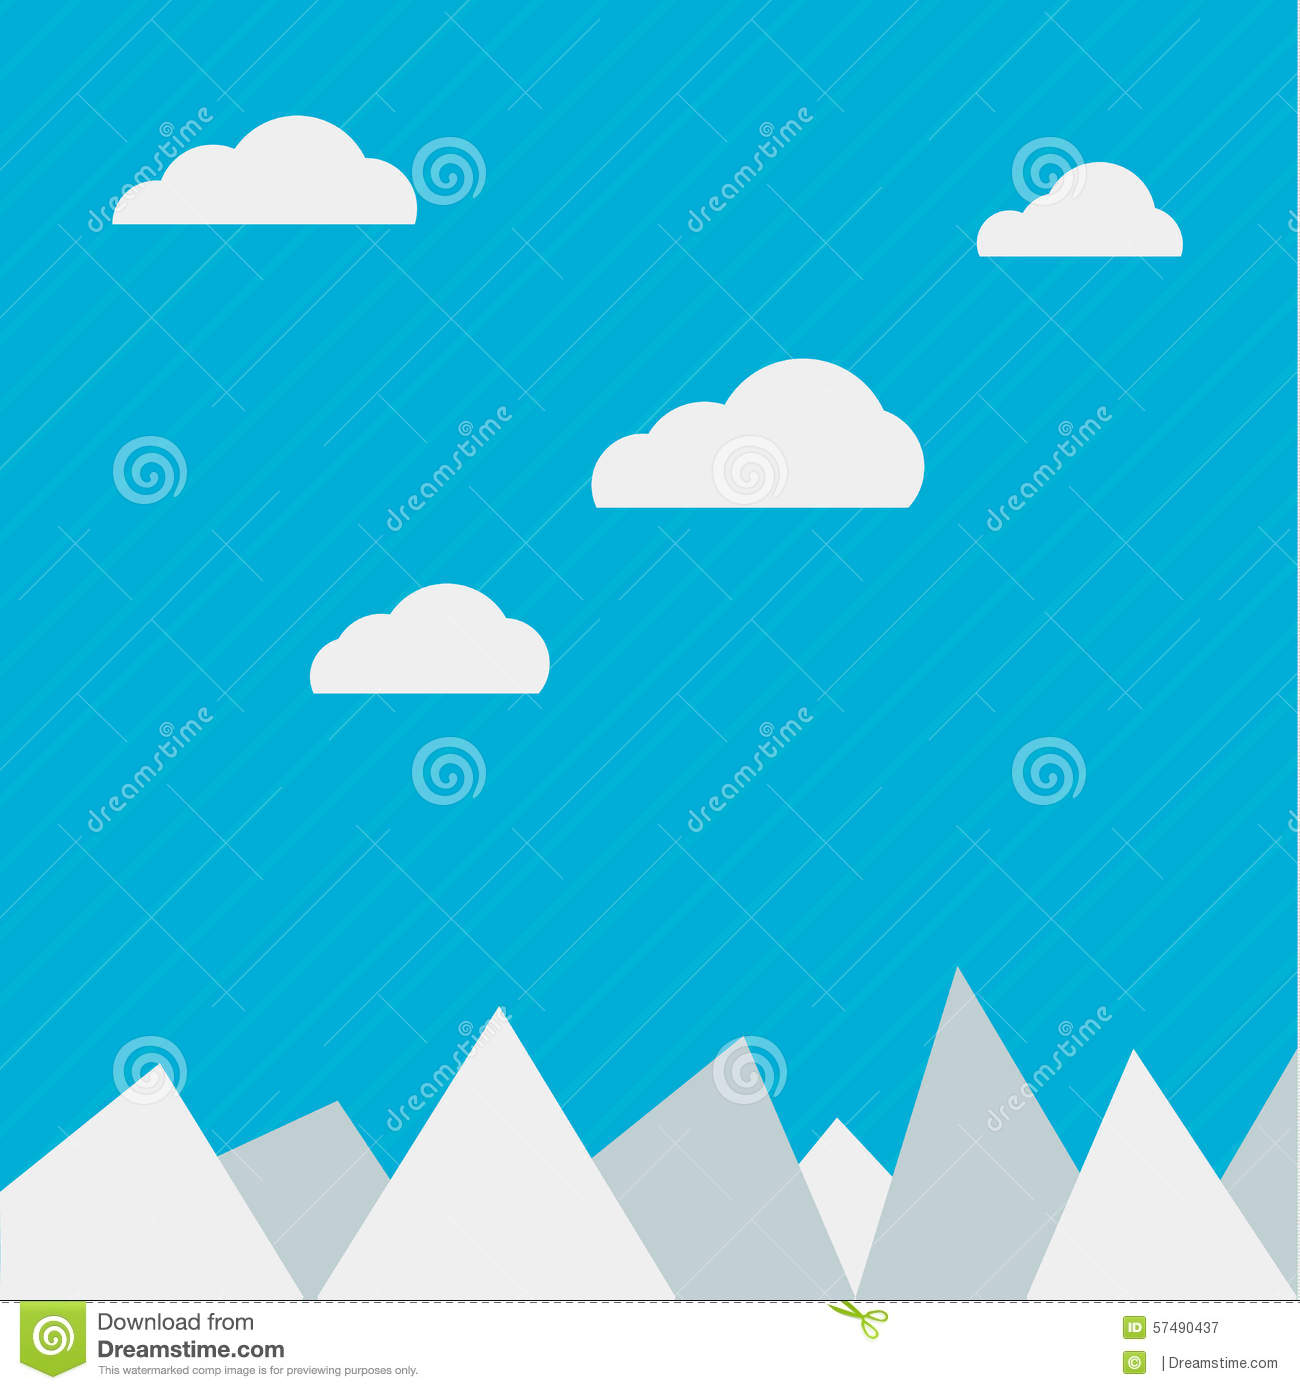 Clouds And Mountains Background Flat Web Illustration Vectors